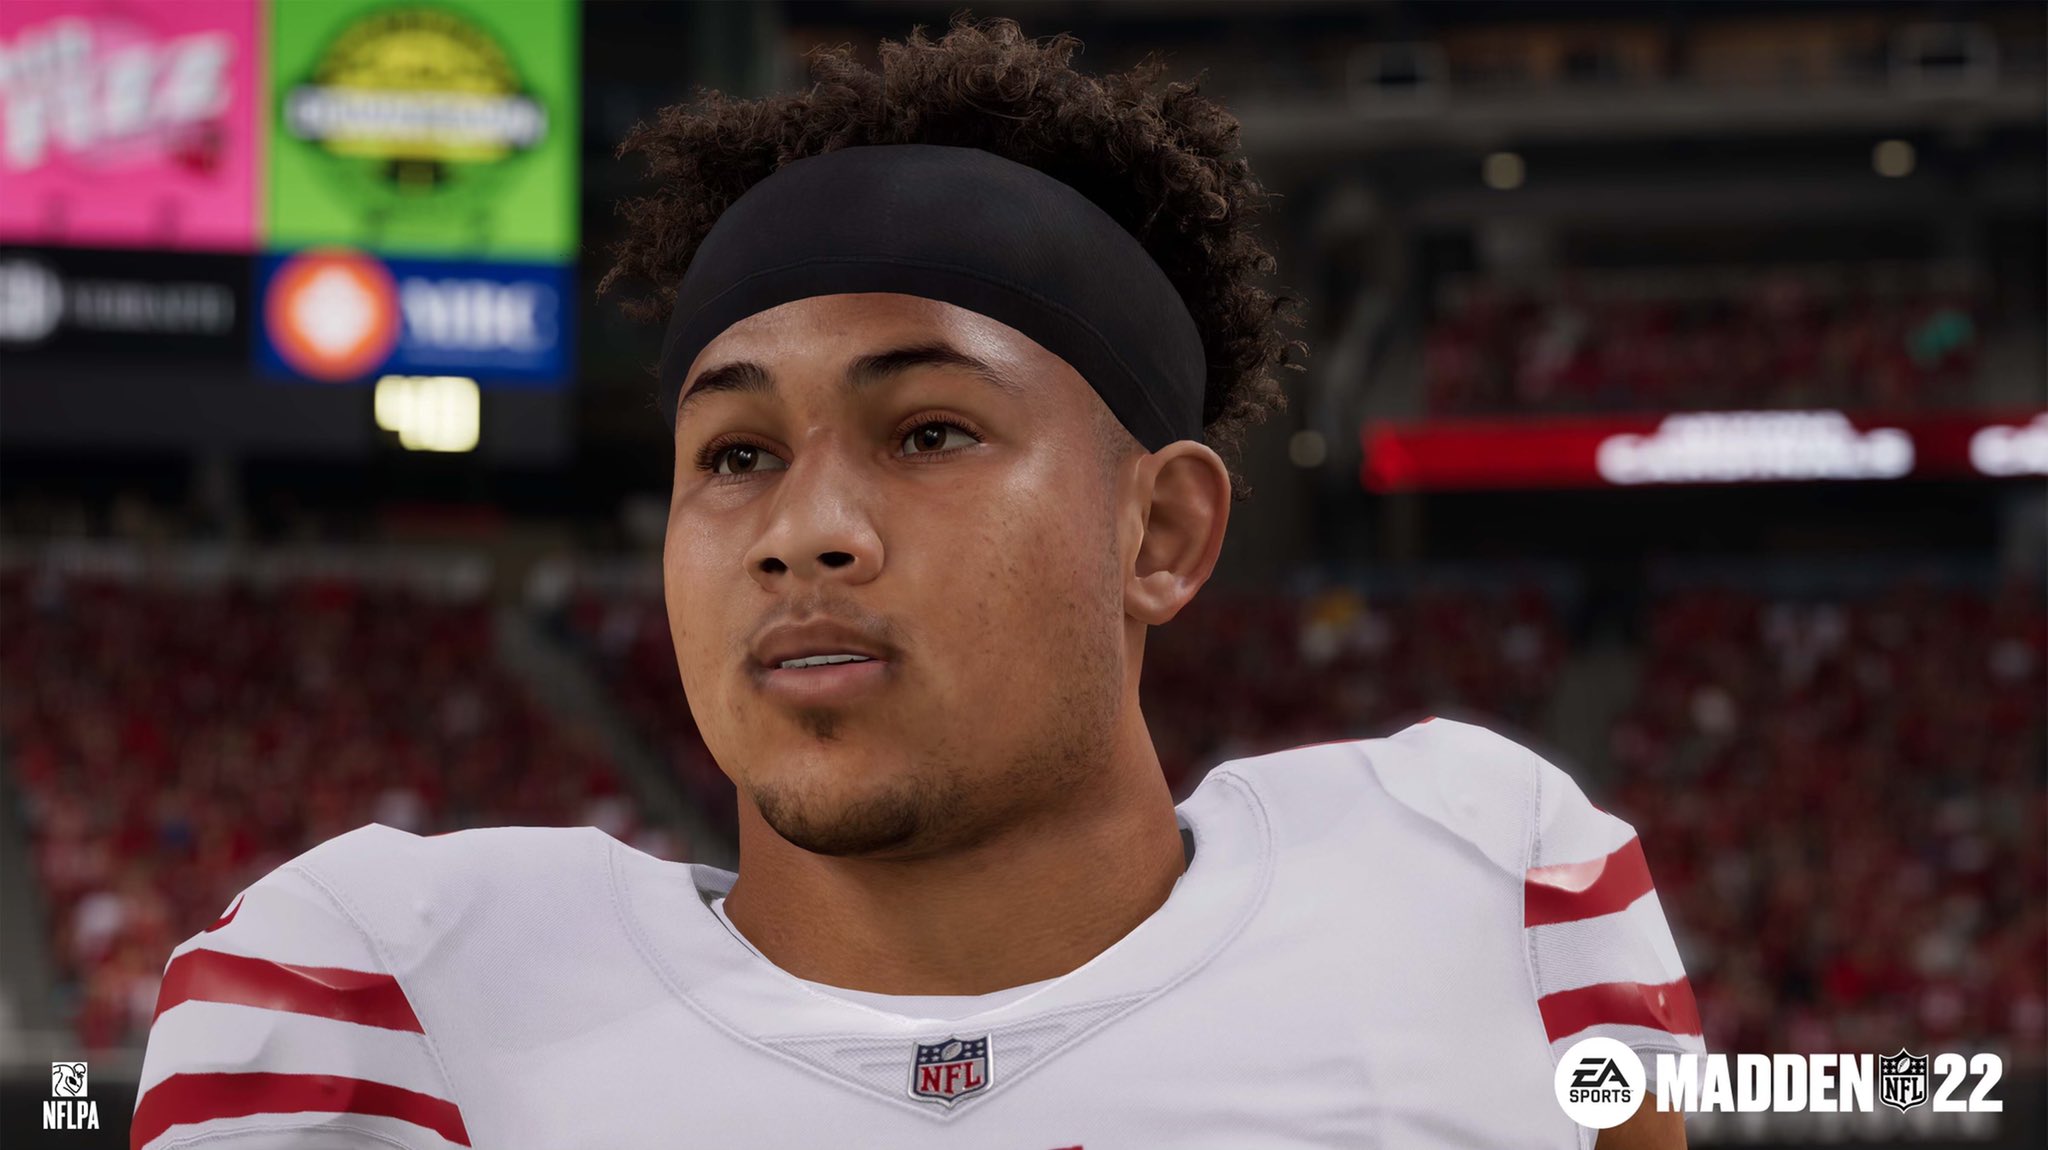 Madden NFL 24 on X: 'Here are just some of the new updates to hit